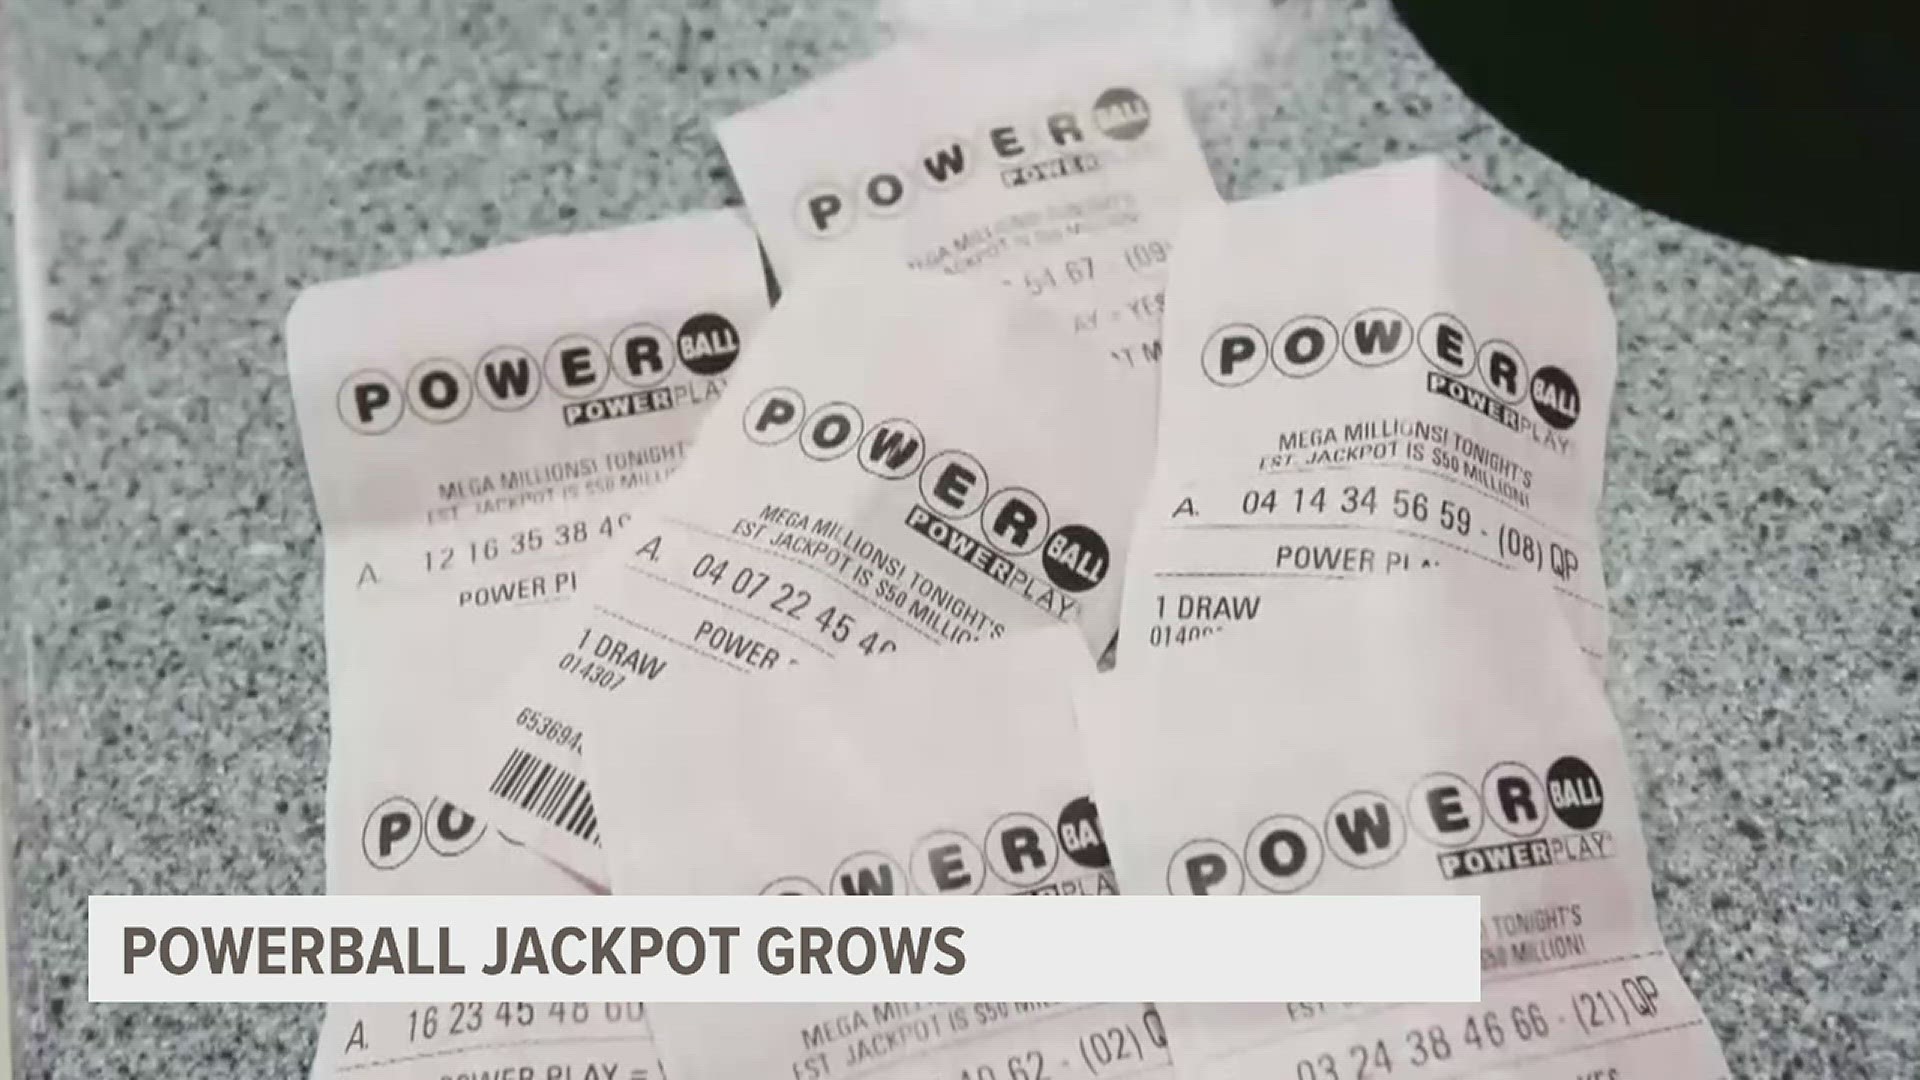 It currently stands at the 10th largest prize in Powerball history and the third largest this year.